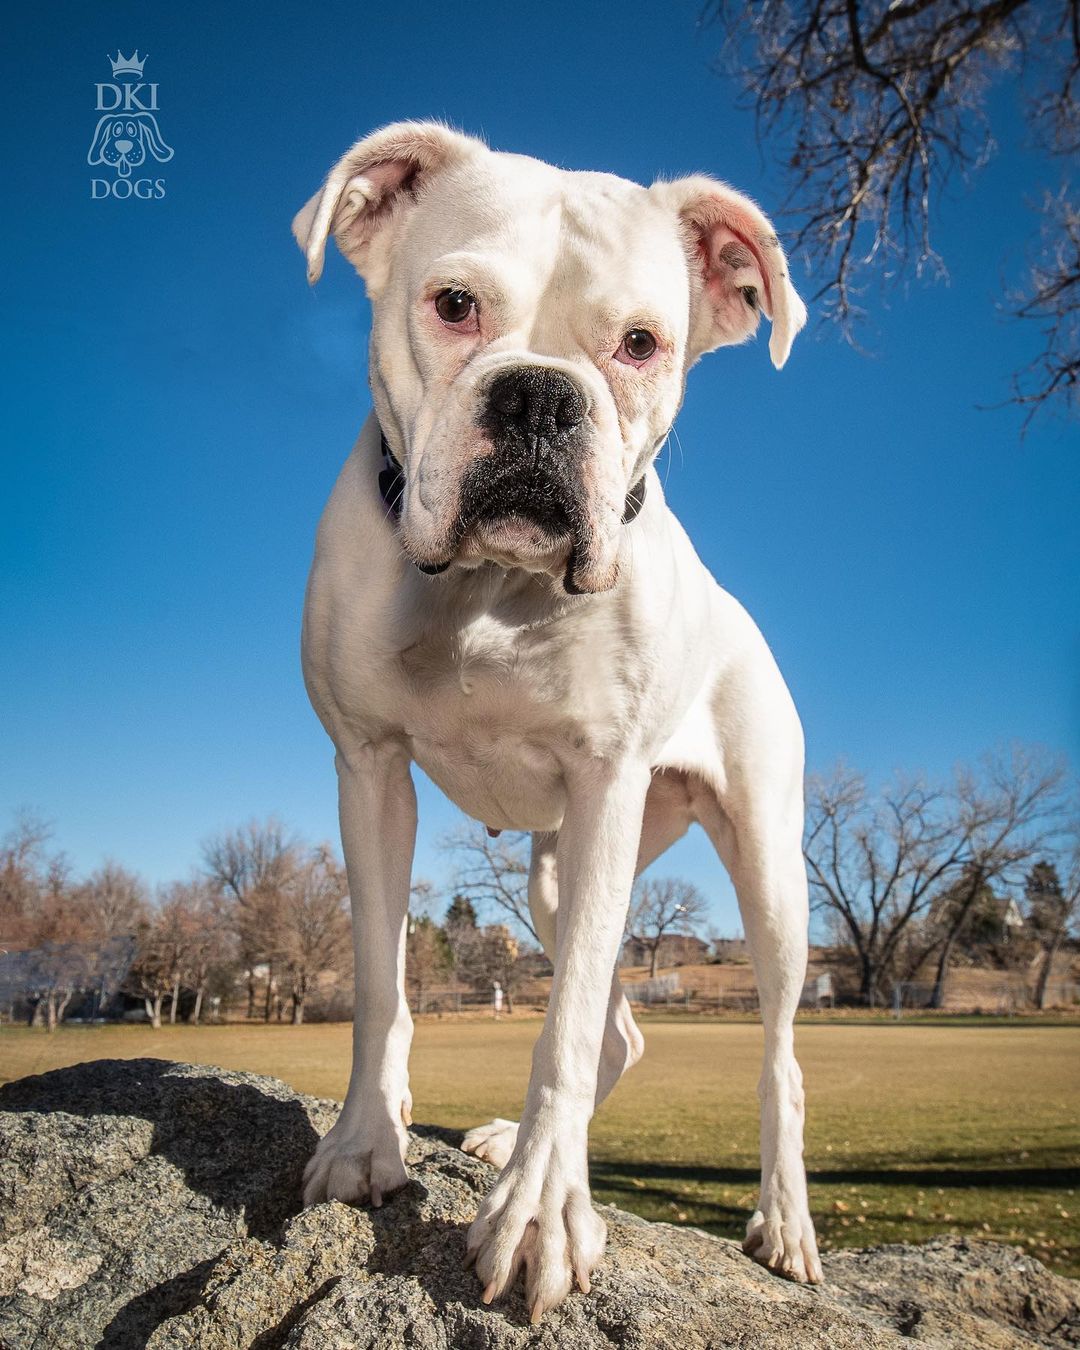 Joanie needs a home. <a target='_blank' href='https://www.instagram.com/explore/tags/whiteboxer/'>#whiteboxer</a> <a target='_blank' href='https://www.instagram.com/explore/tags/afoptdontshop/'>#afoptdontshop</a> <a target='_blank' href='https://www.instagram.com/explore/tags/rescuedismyfavoritebreed/'>#rescuedismyfavoritebreed</a> <a target='_blank' href='https://www.instagram.com/explore/tags/hobocareboxerrescue/'>#hobocareboxerrescue</a>